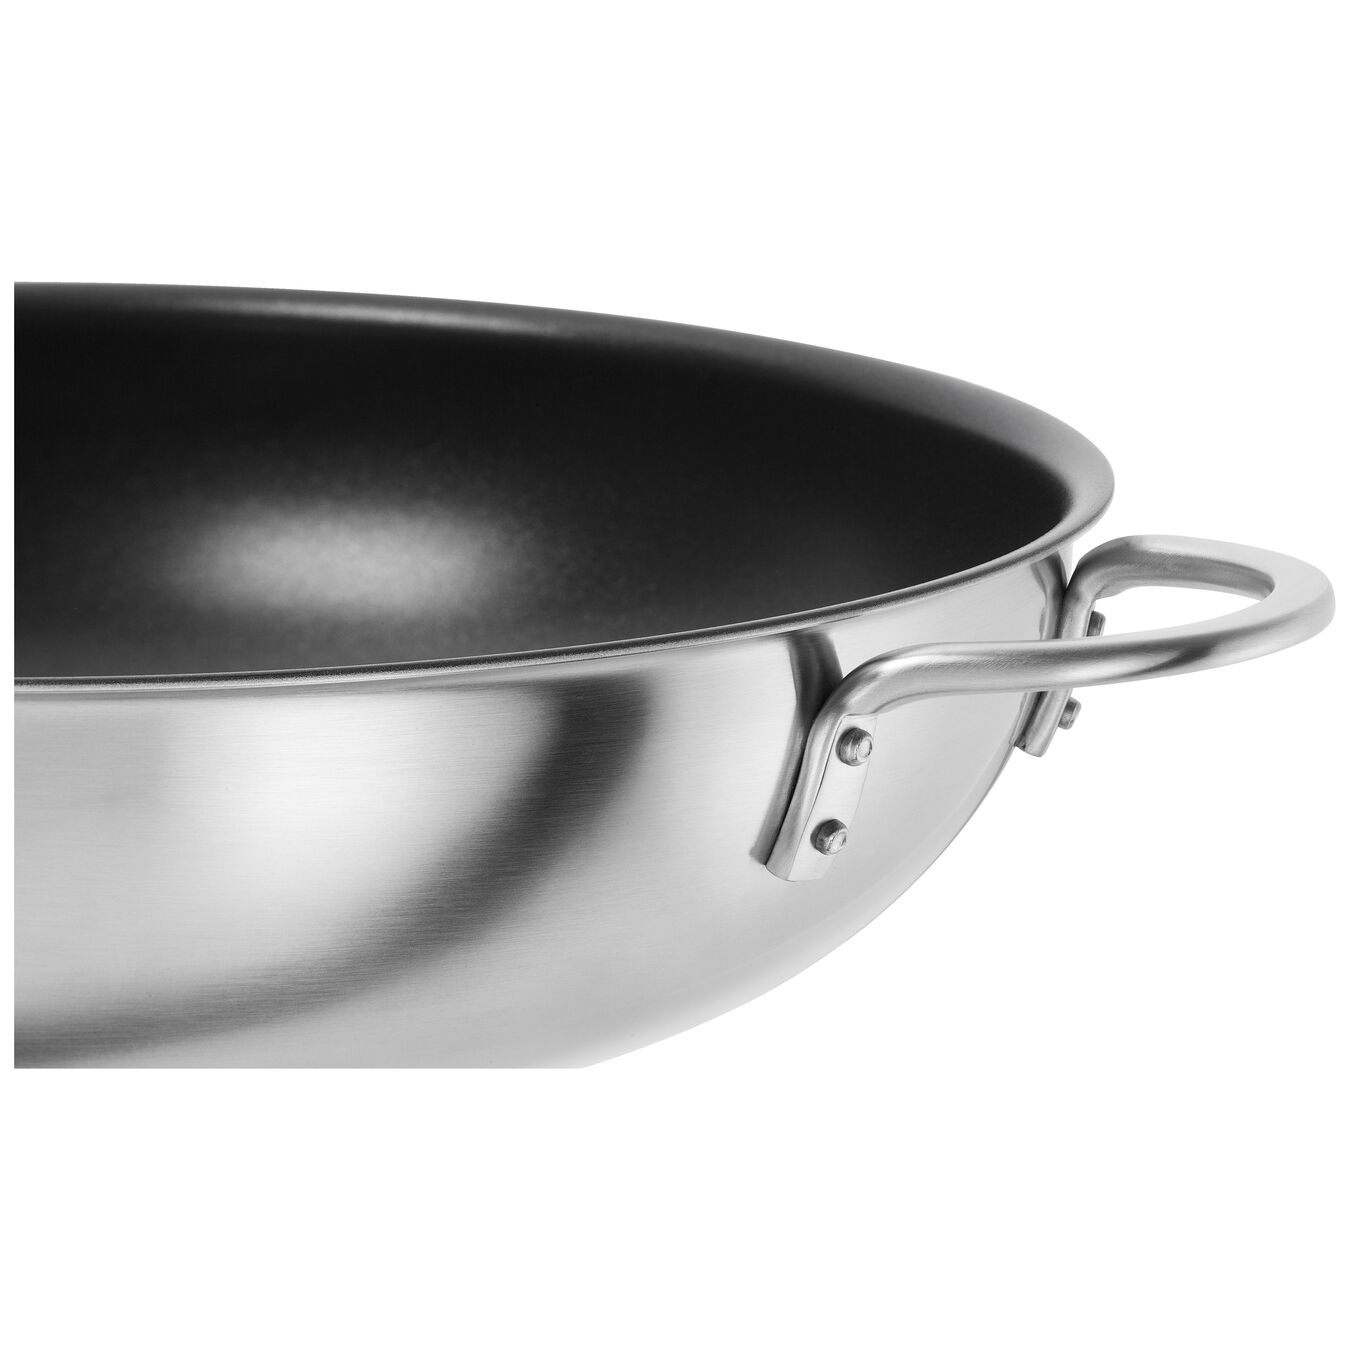 32 cm / 12.5 inch 18/10 Stainless Steel Wok,,large 2